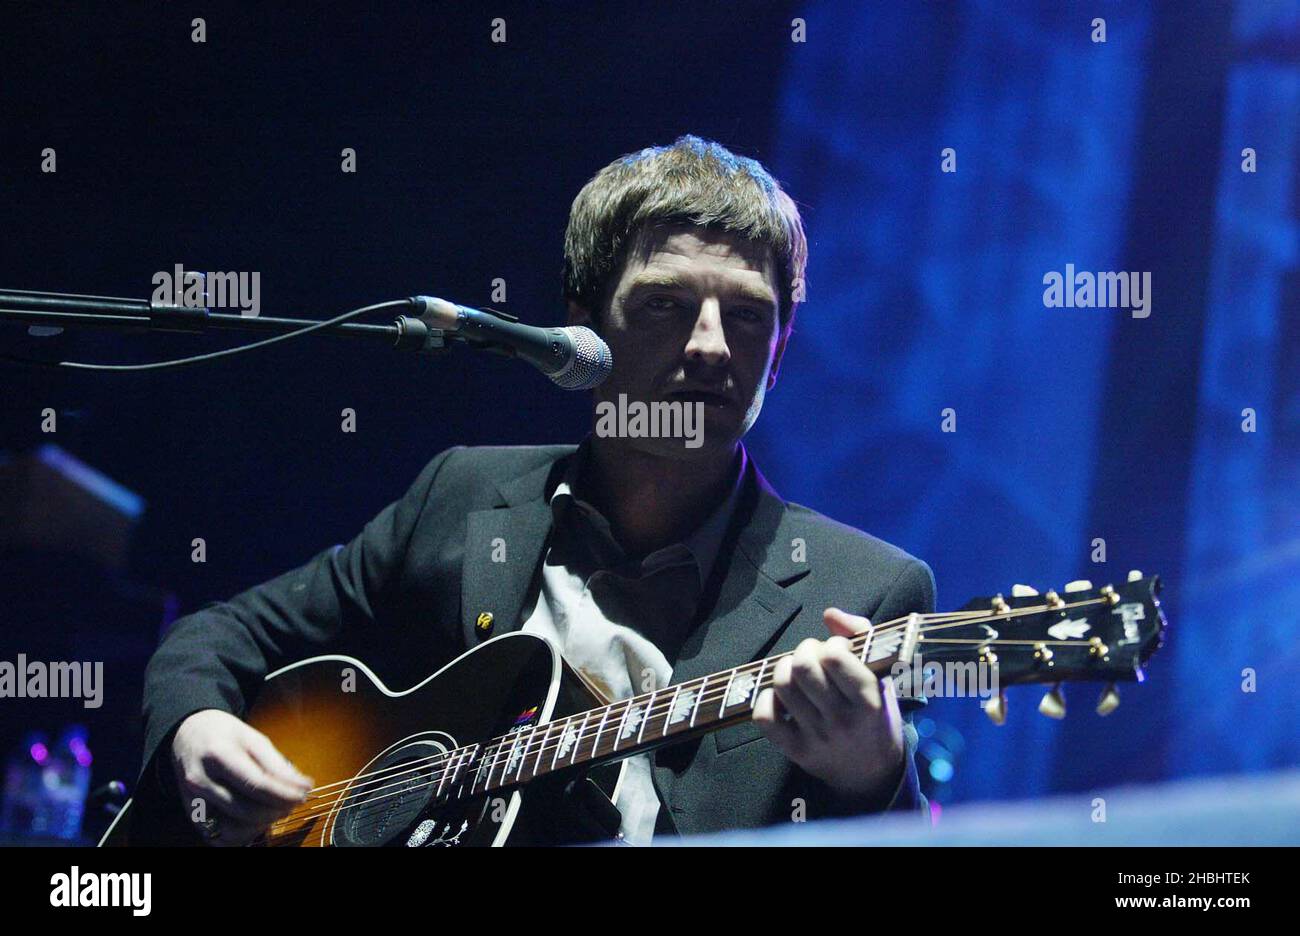 Noel Gallagher performing live on stage at the Teenage Cancer Trust Concert at the Royal Albert Hall London. Live. Half Length. Stock Photo